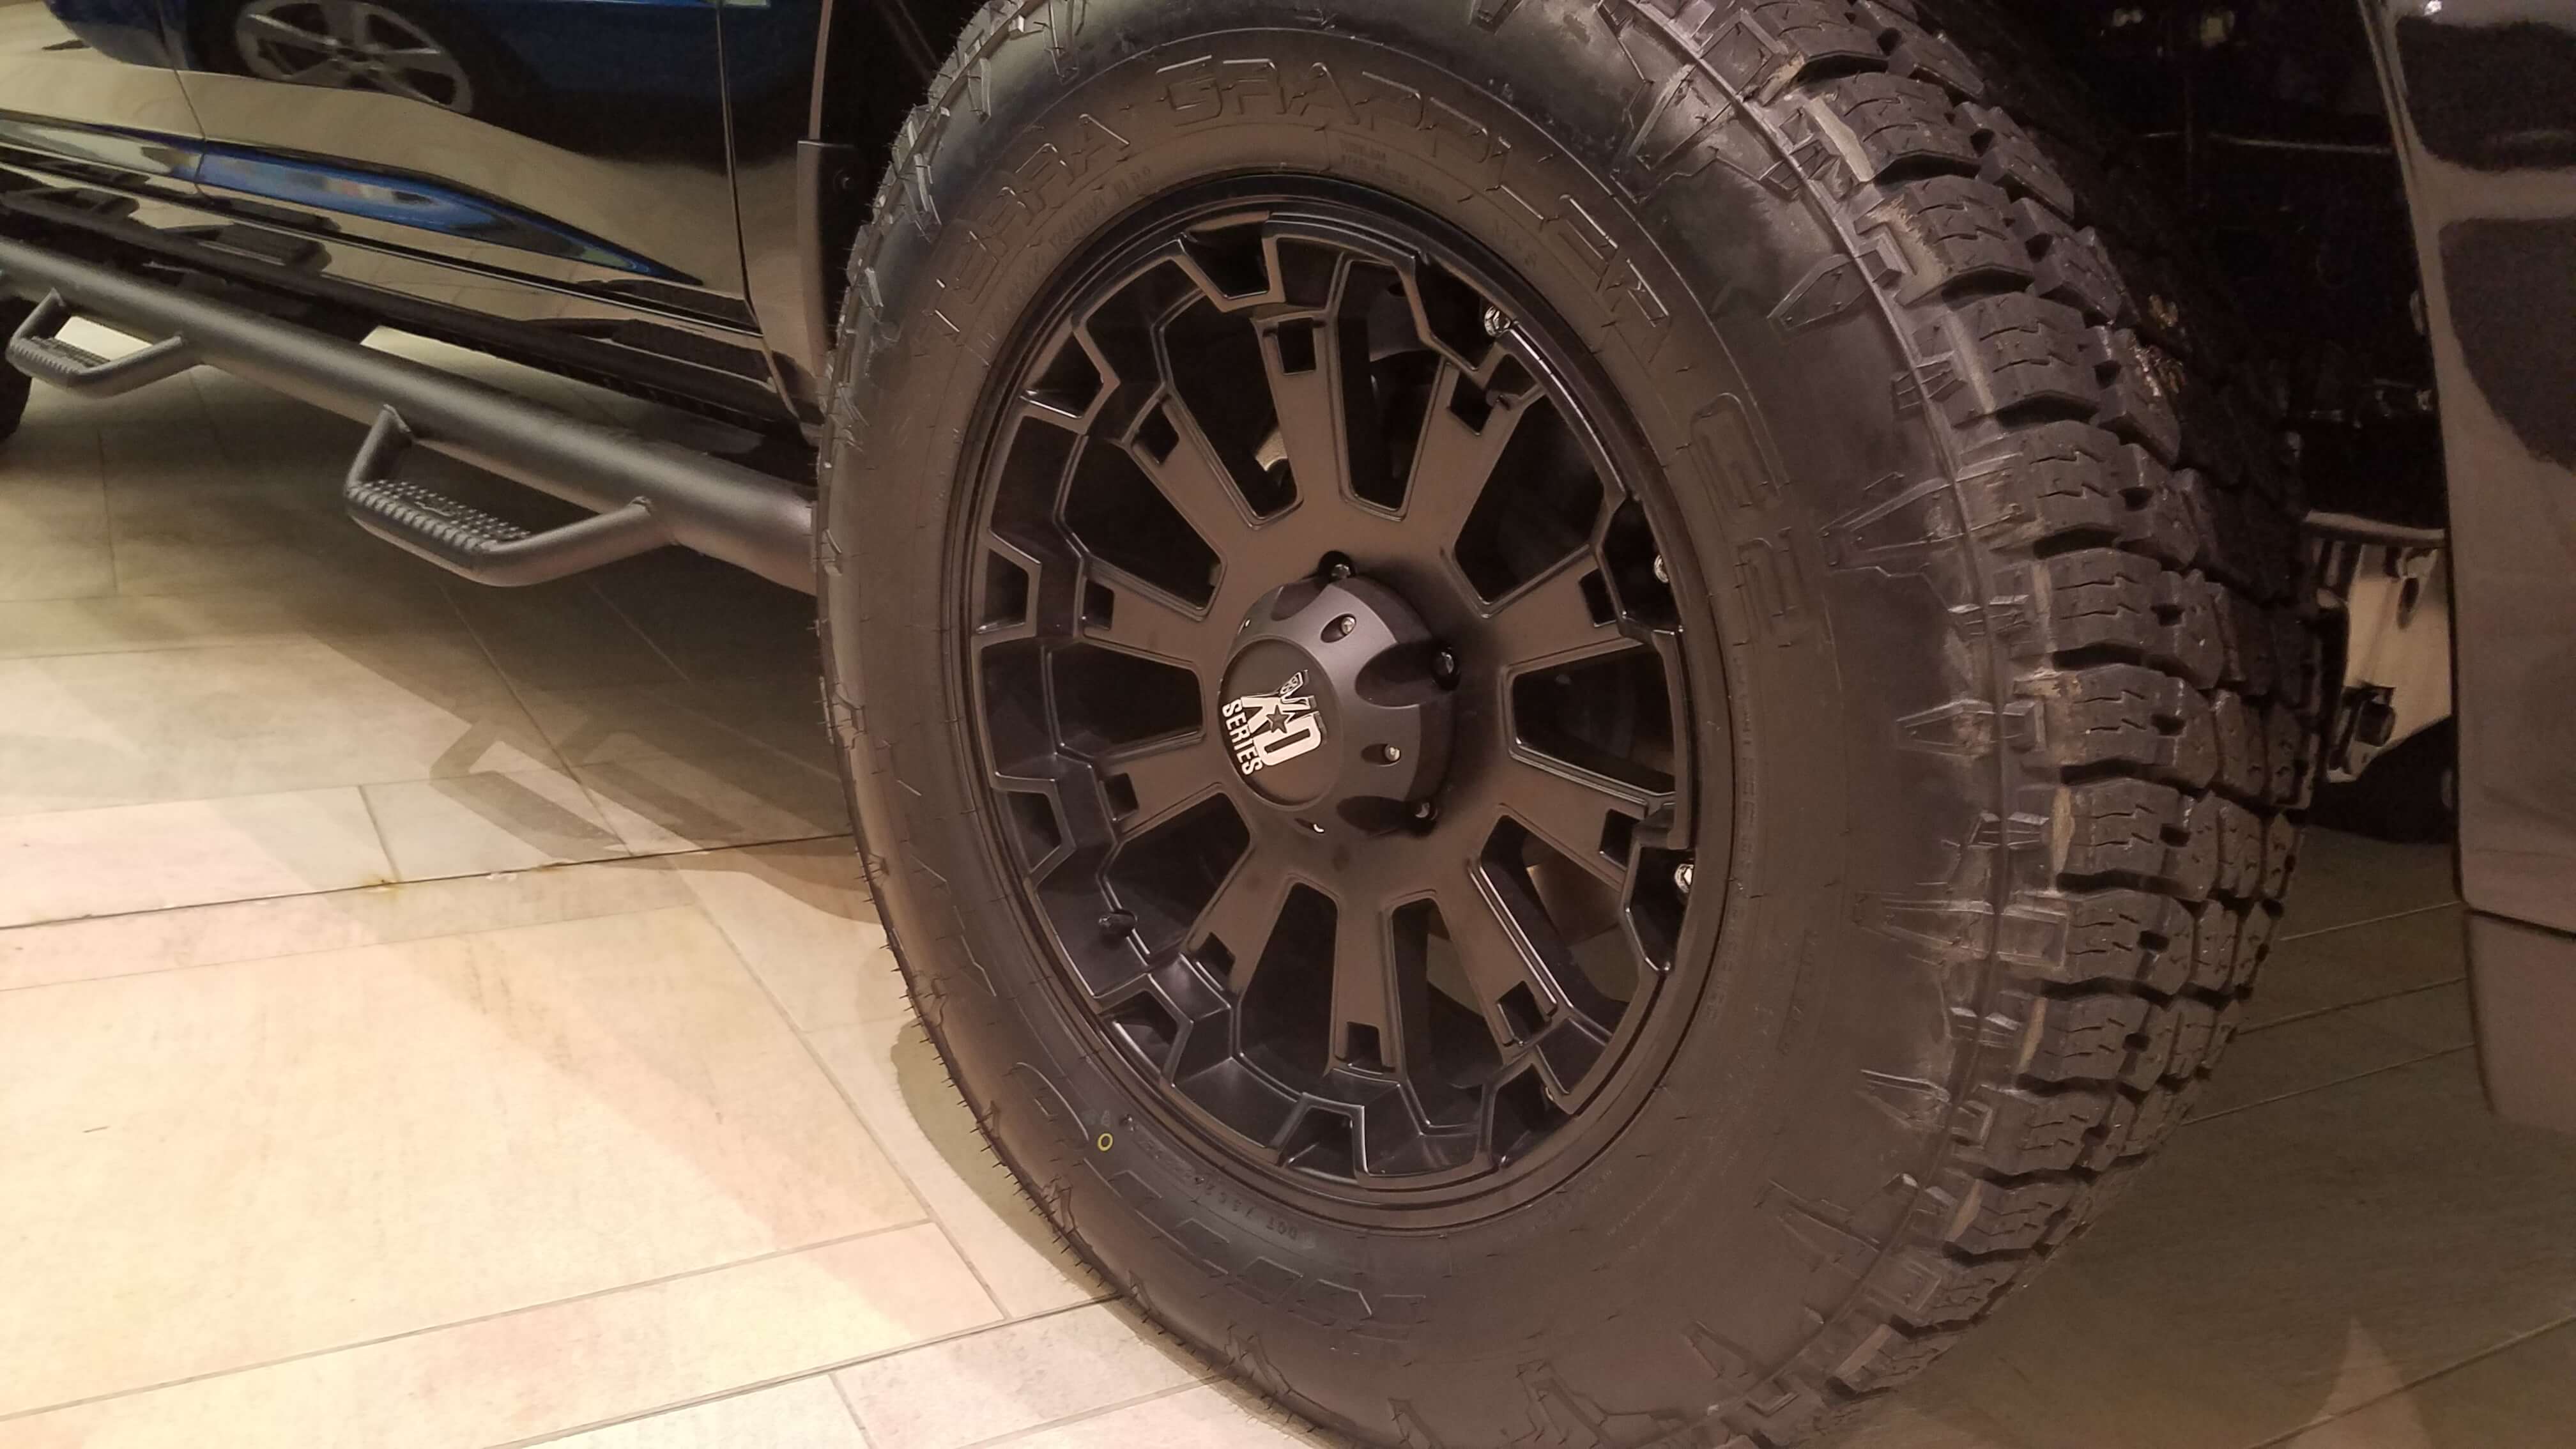 20” XD 800 Misfit Matte Black and Nitto 295/60/20 Terra Grappler G2 Tires - Matches the black out of the rest of the truck with great build quality.  G2’s are the are the “go to” tire for on/off road capability, quite off the trails, and capable on them.